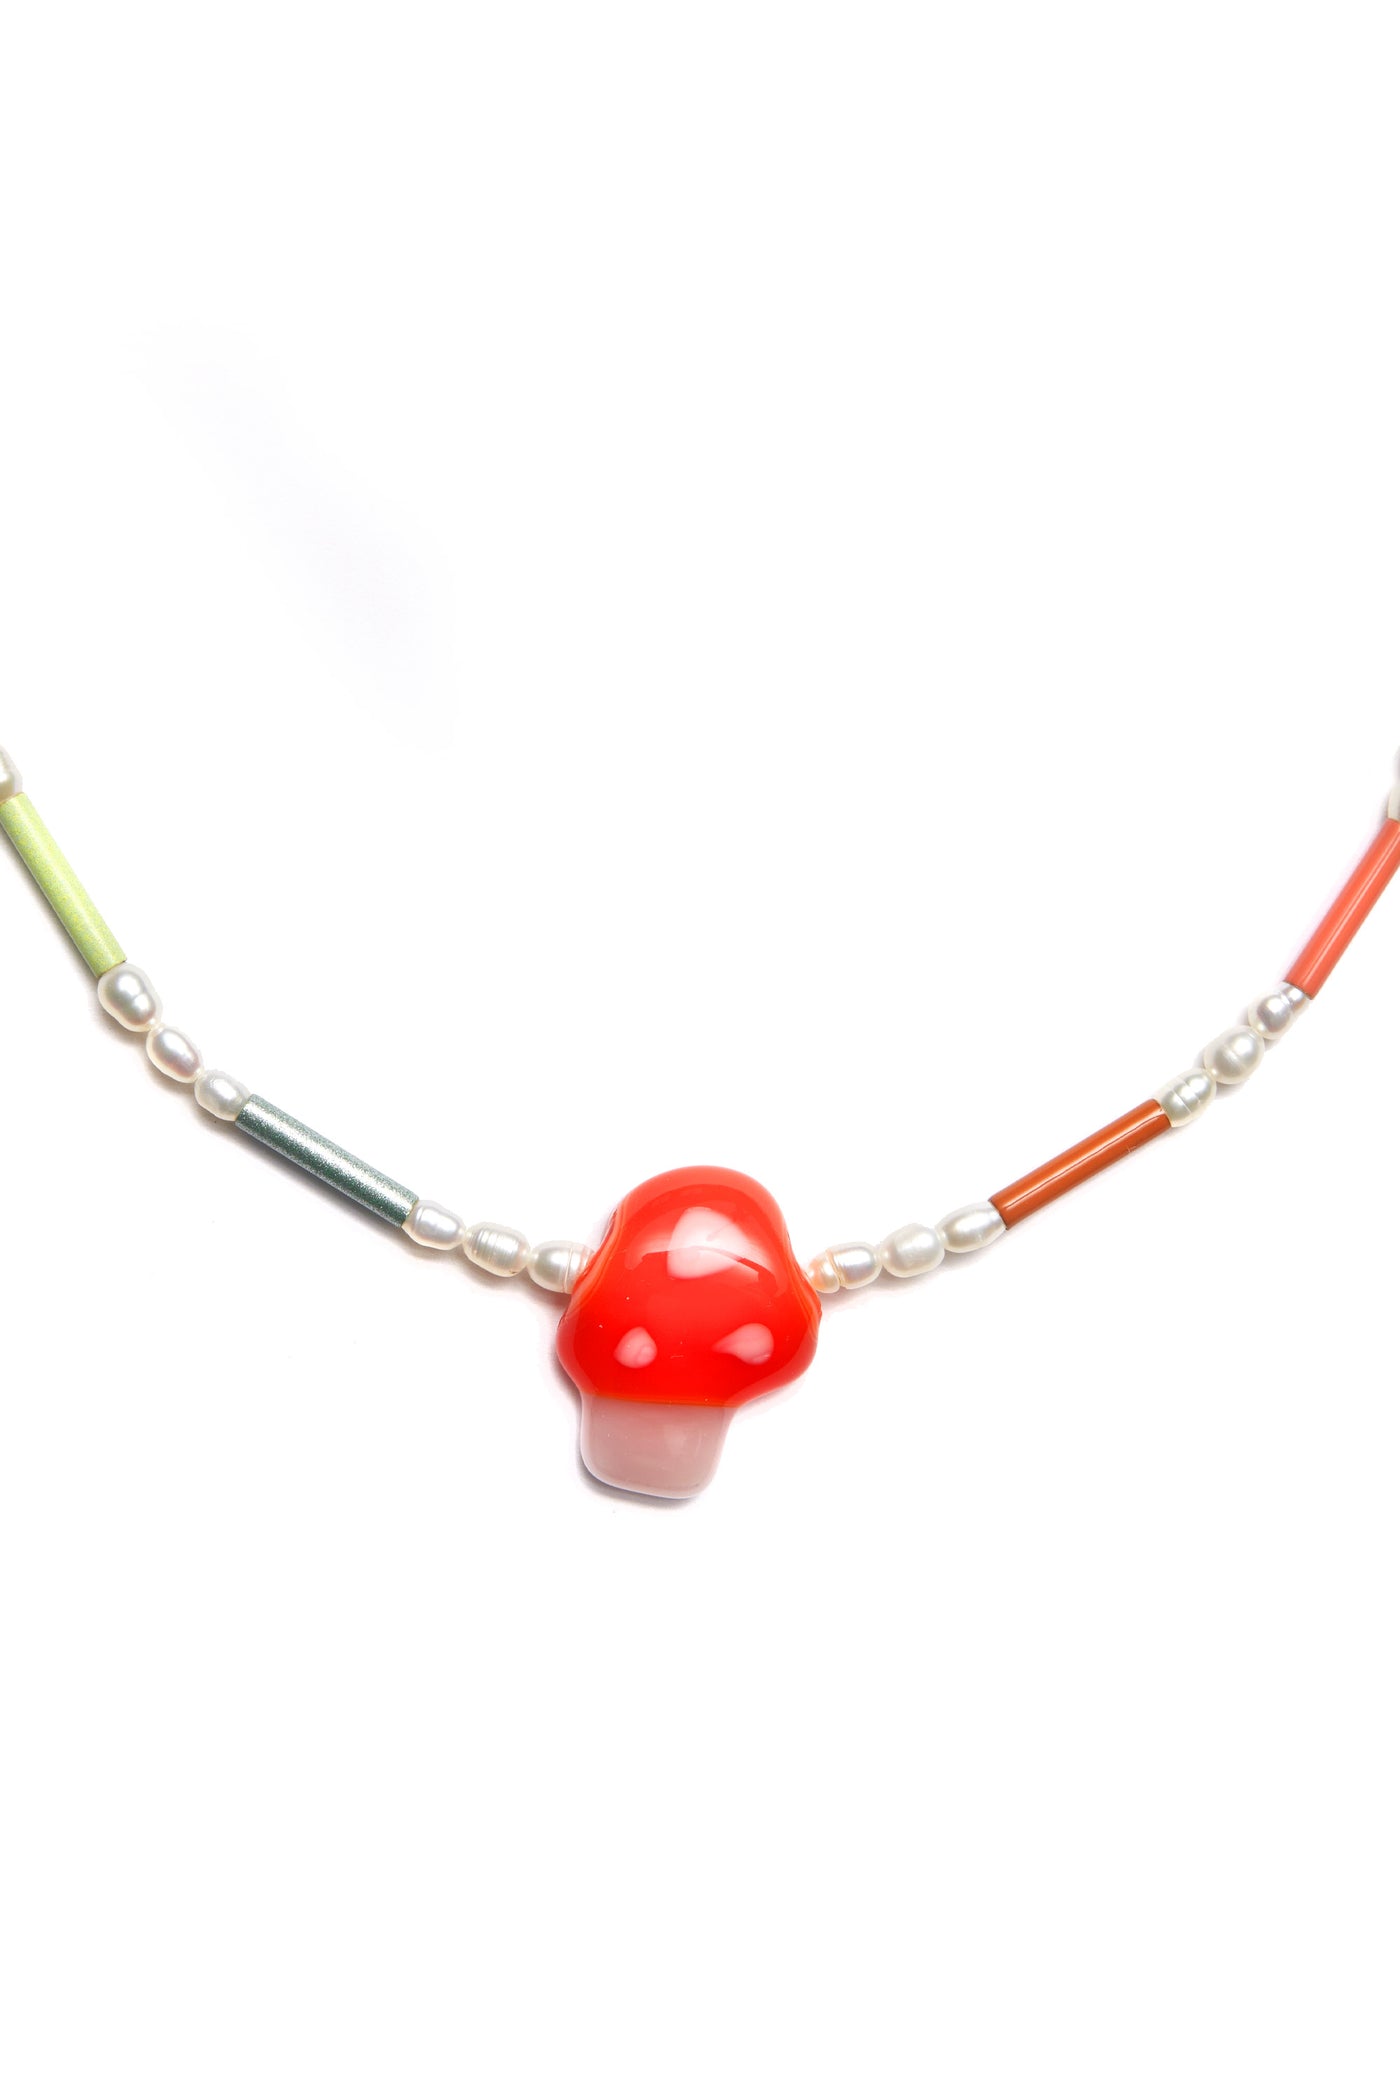 Bianca Mavrick x Lawn Bowls Mushroom Necklace Pearl and Glass Pendant Close Up